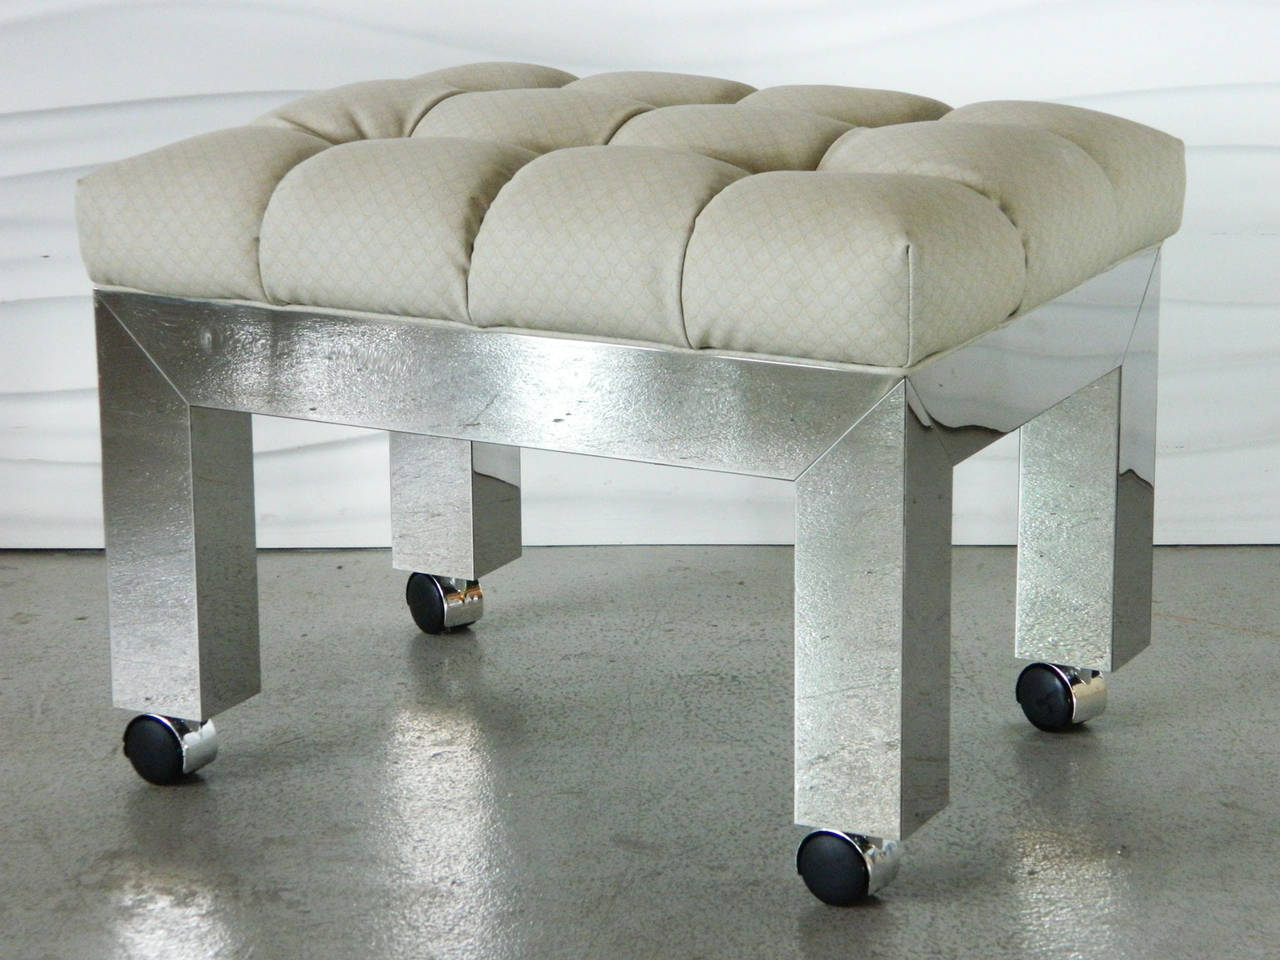 Designed by American designer Paul Evans for a custom dressing room, this chrome vanity stool has a tufted seat cushion and sits on casters.